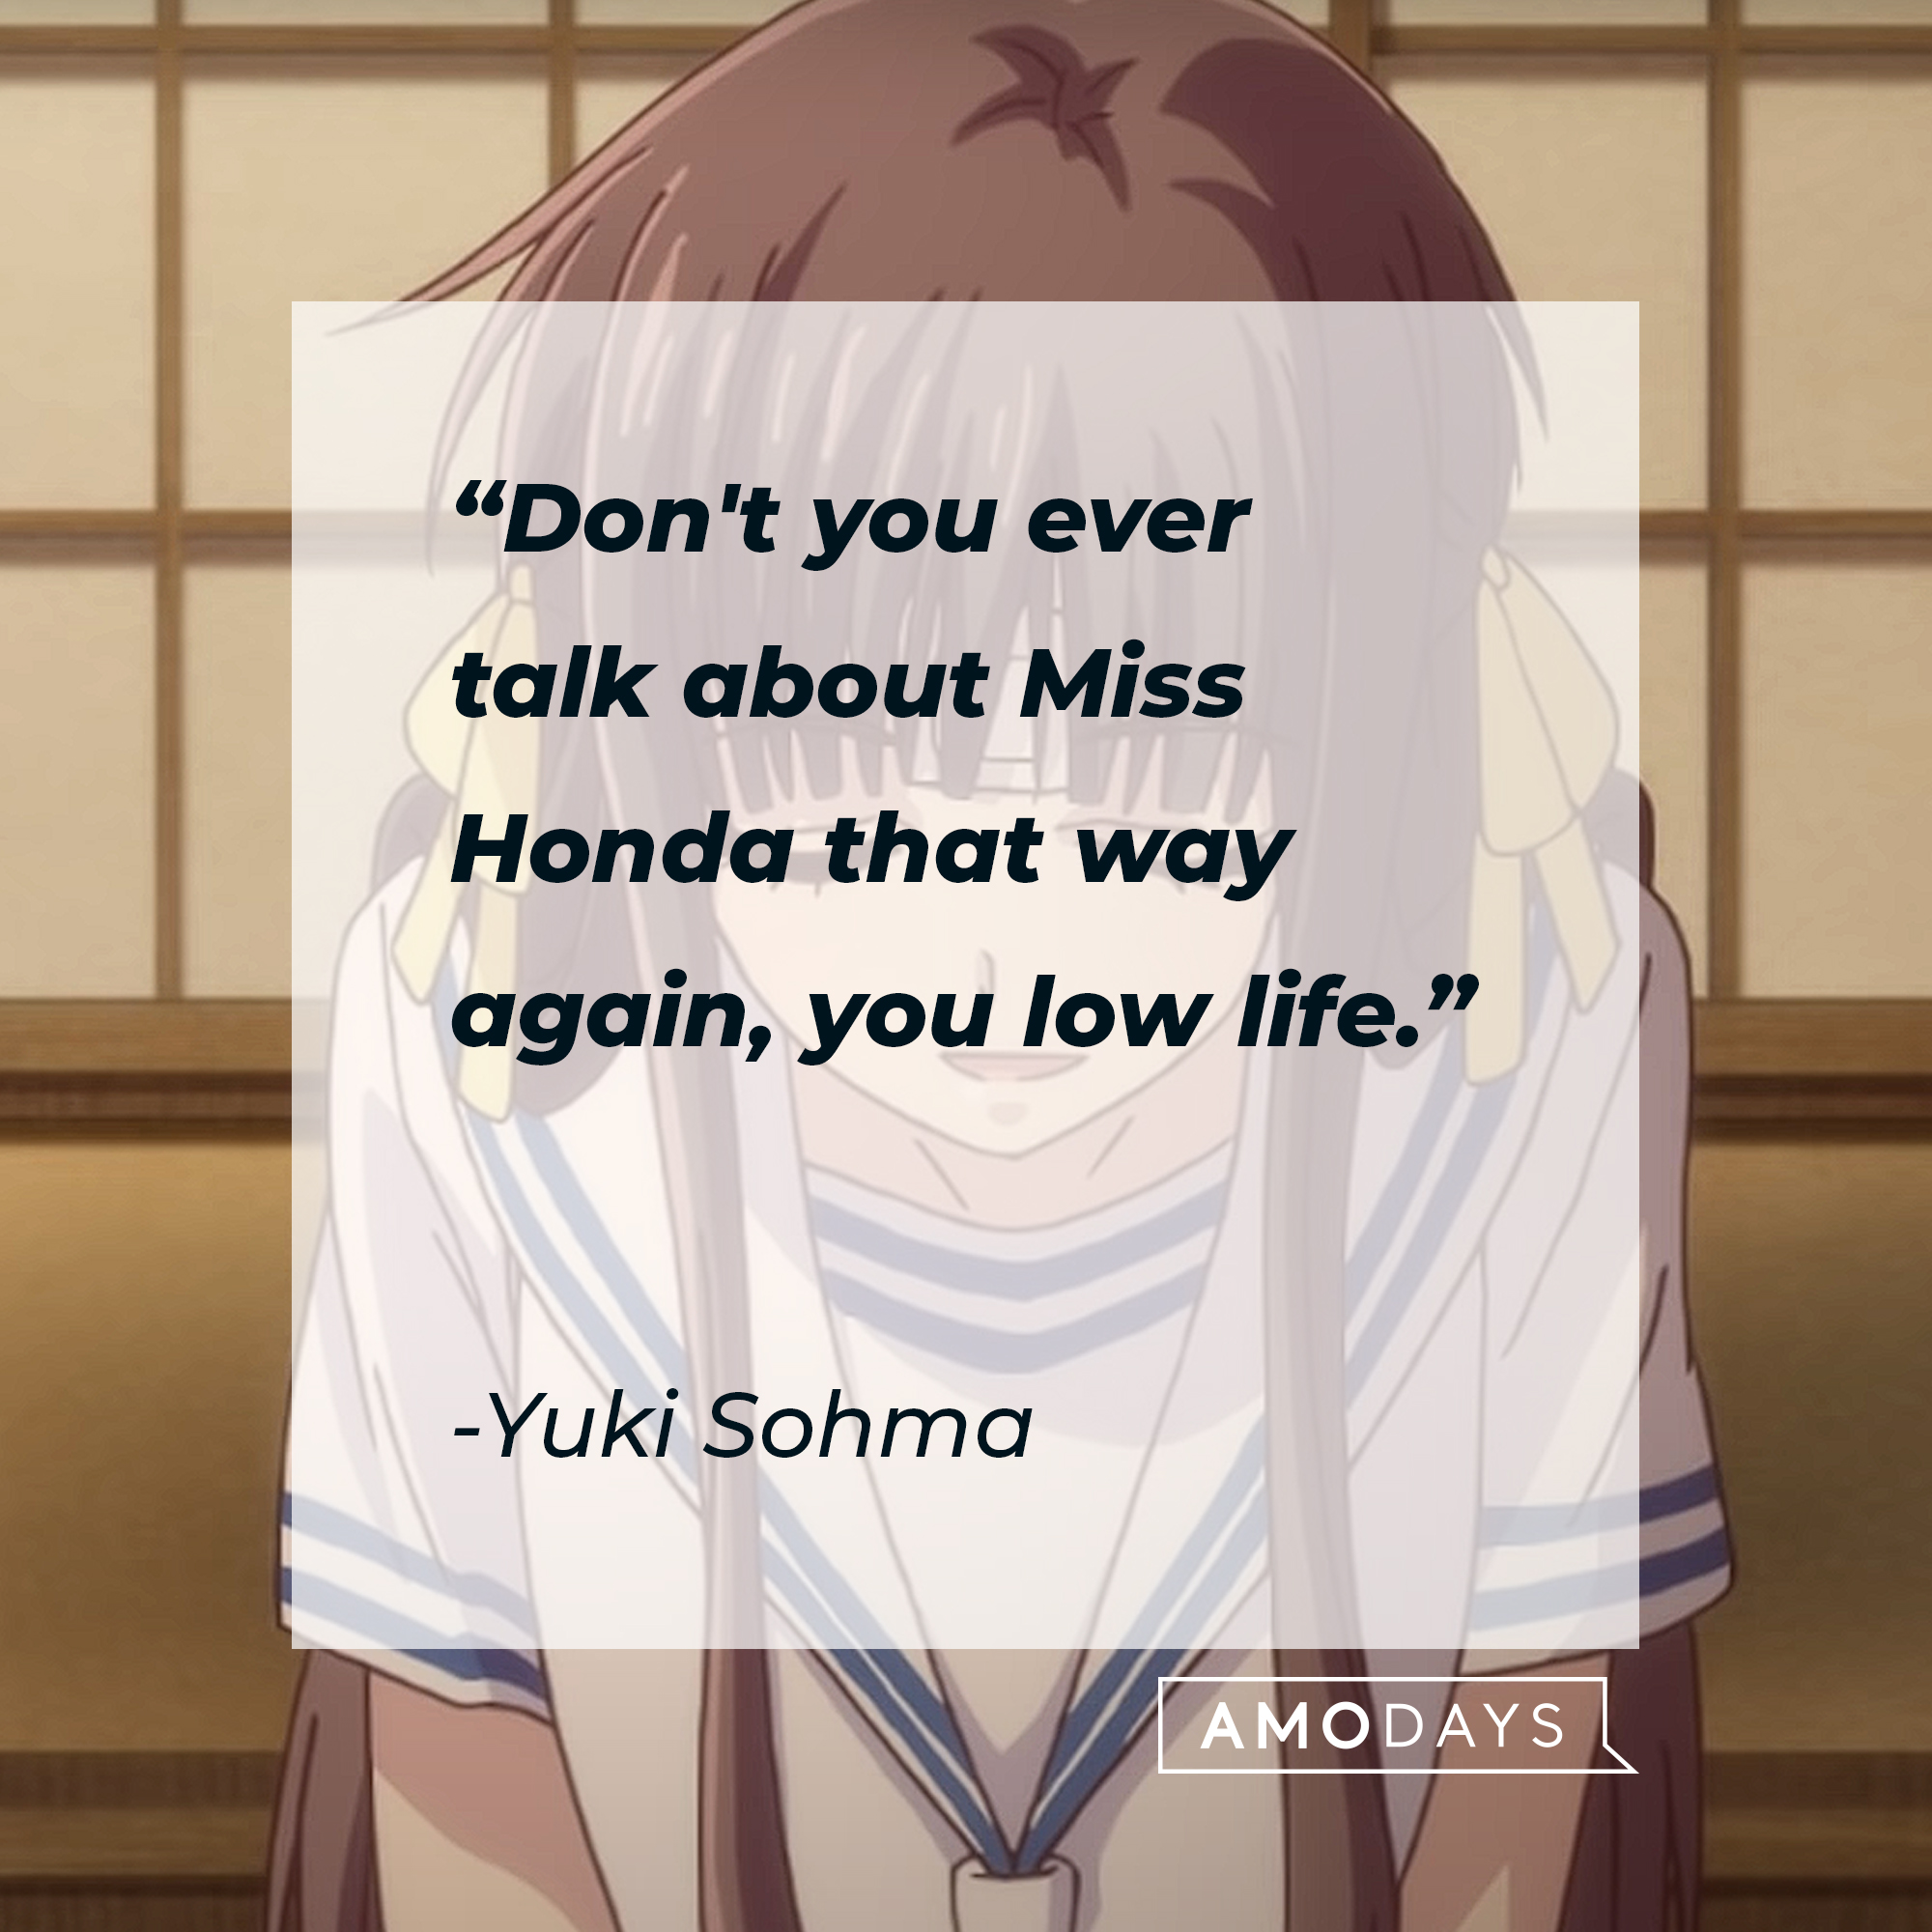 Yuki Sohma's quote: "Don't you ever talk about Miss Honda that way again, you low life." | Image: youtube.com/Crunchyroll Collection